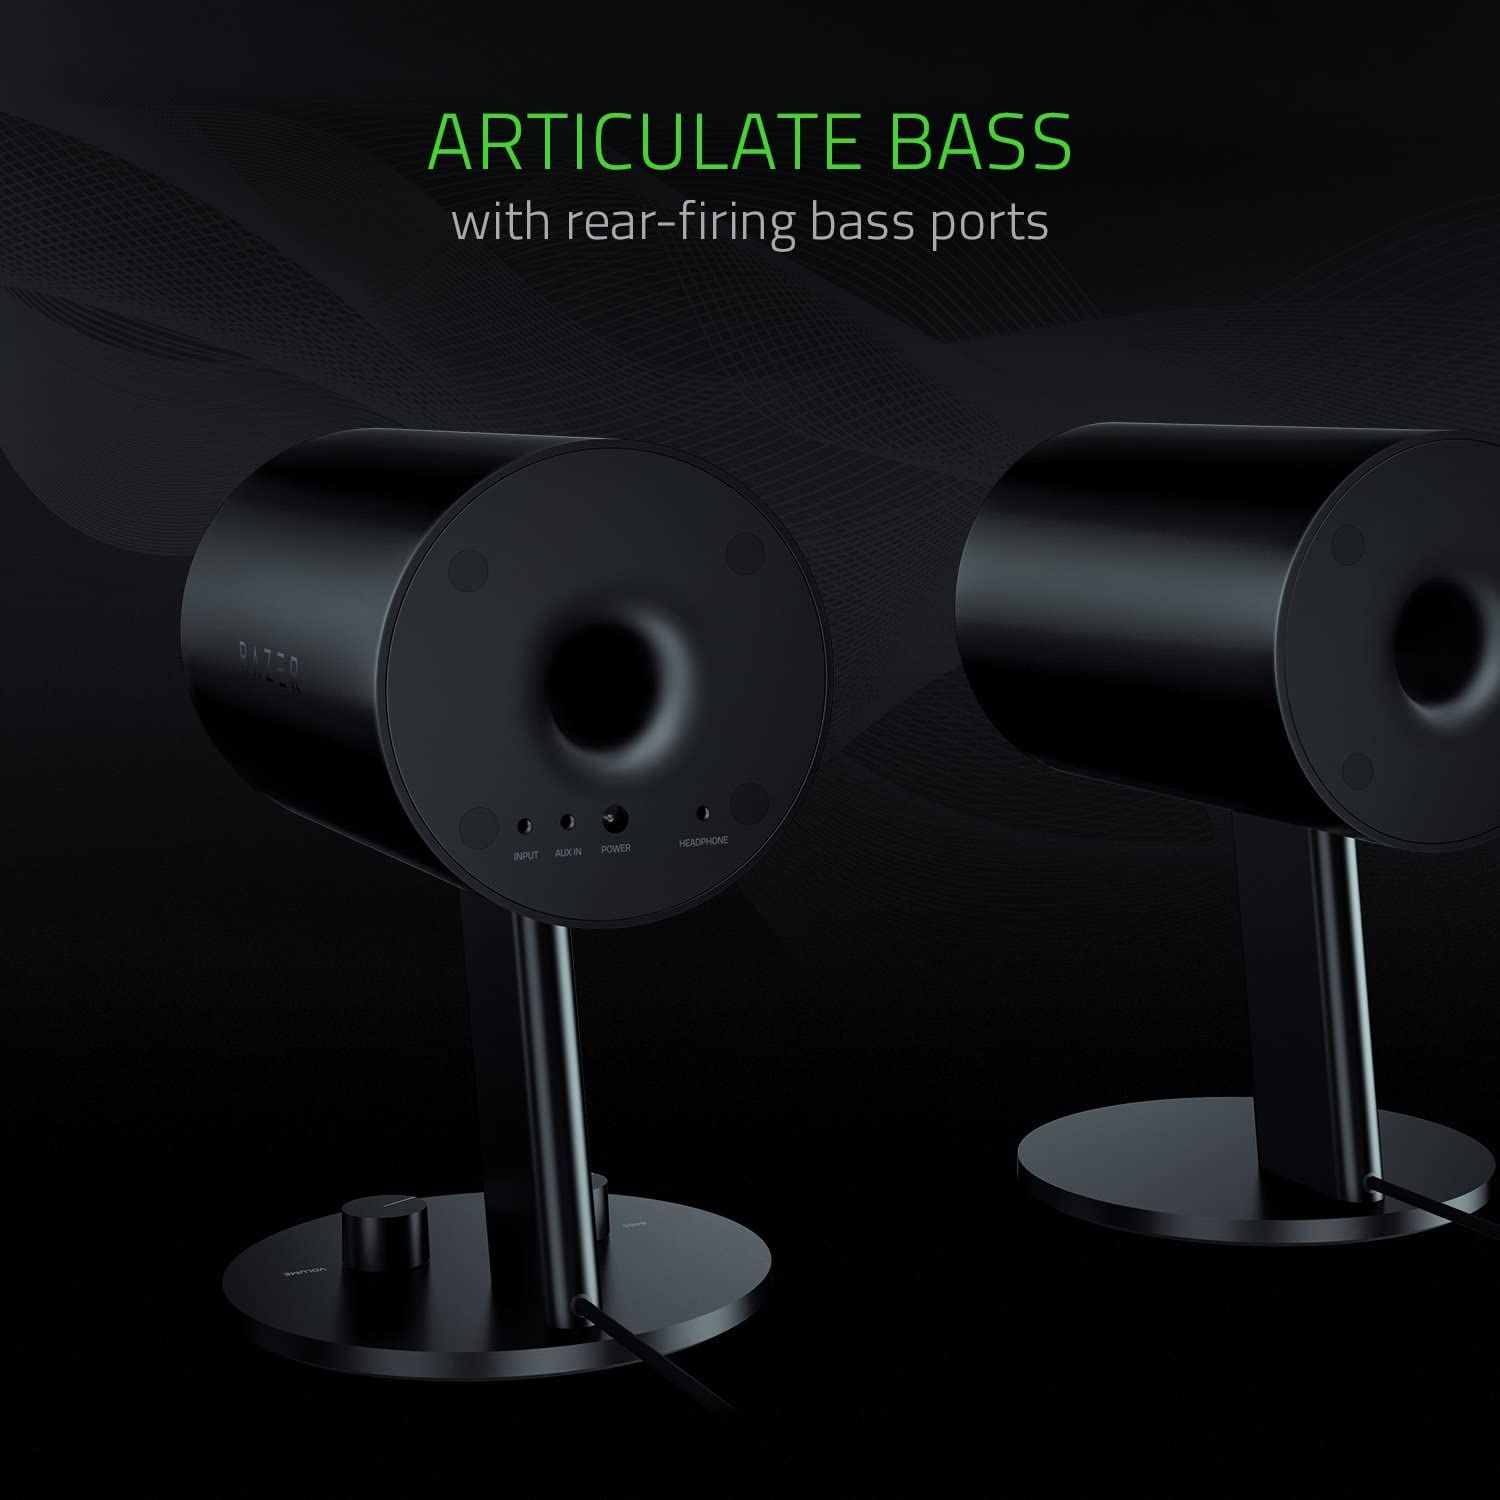 the rear facing bass ports of the razer nommo